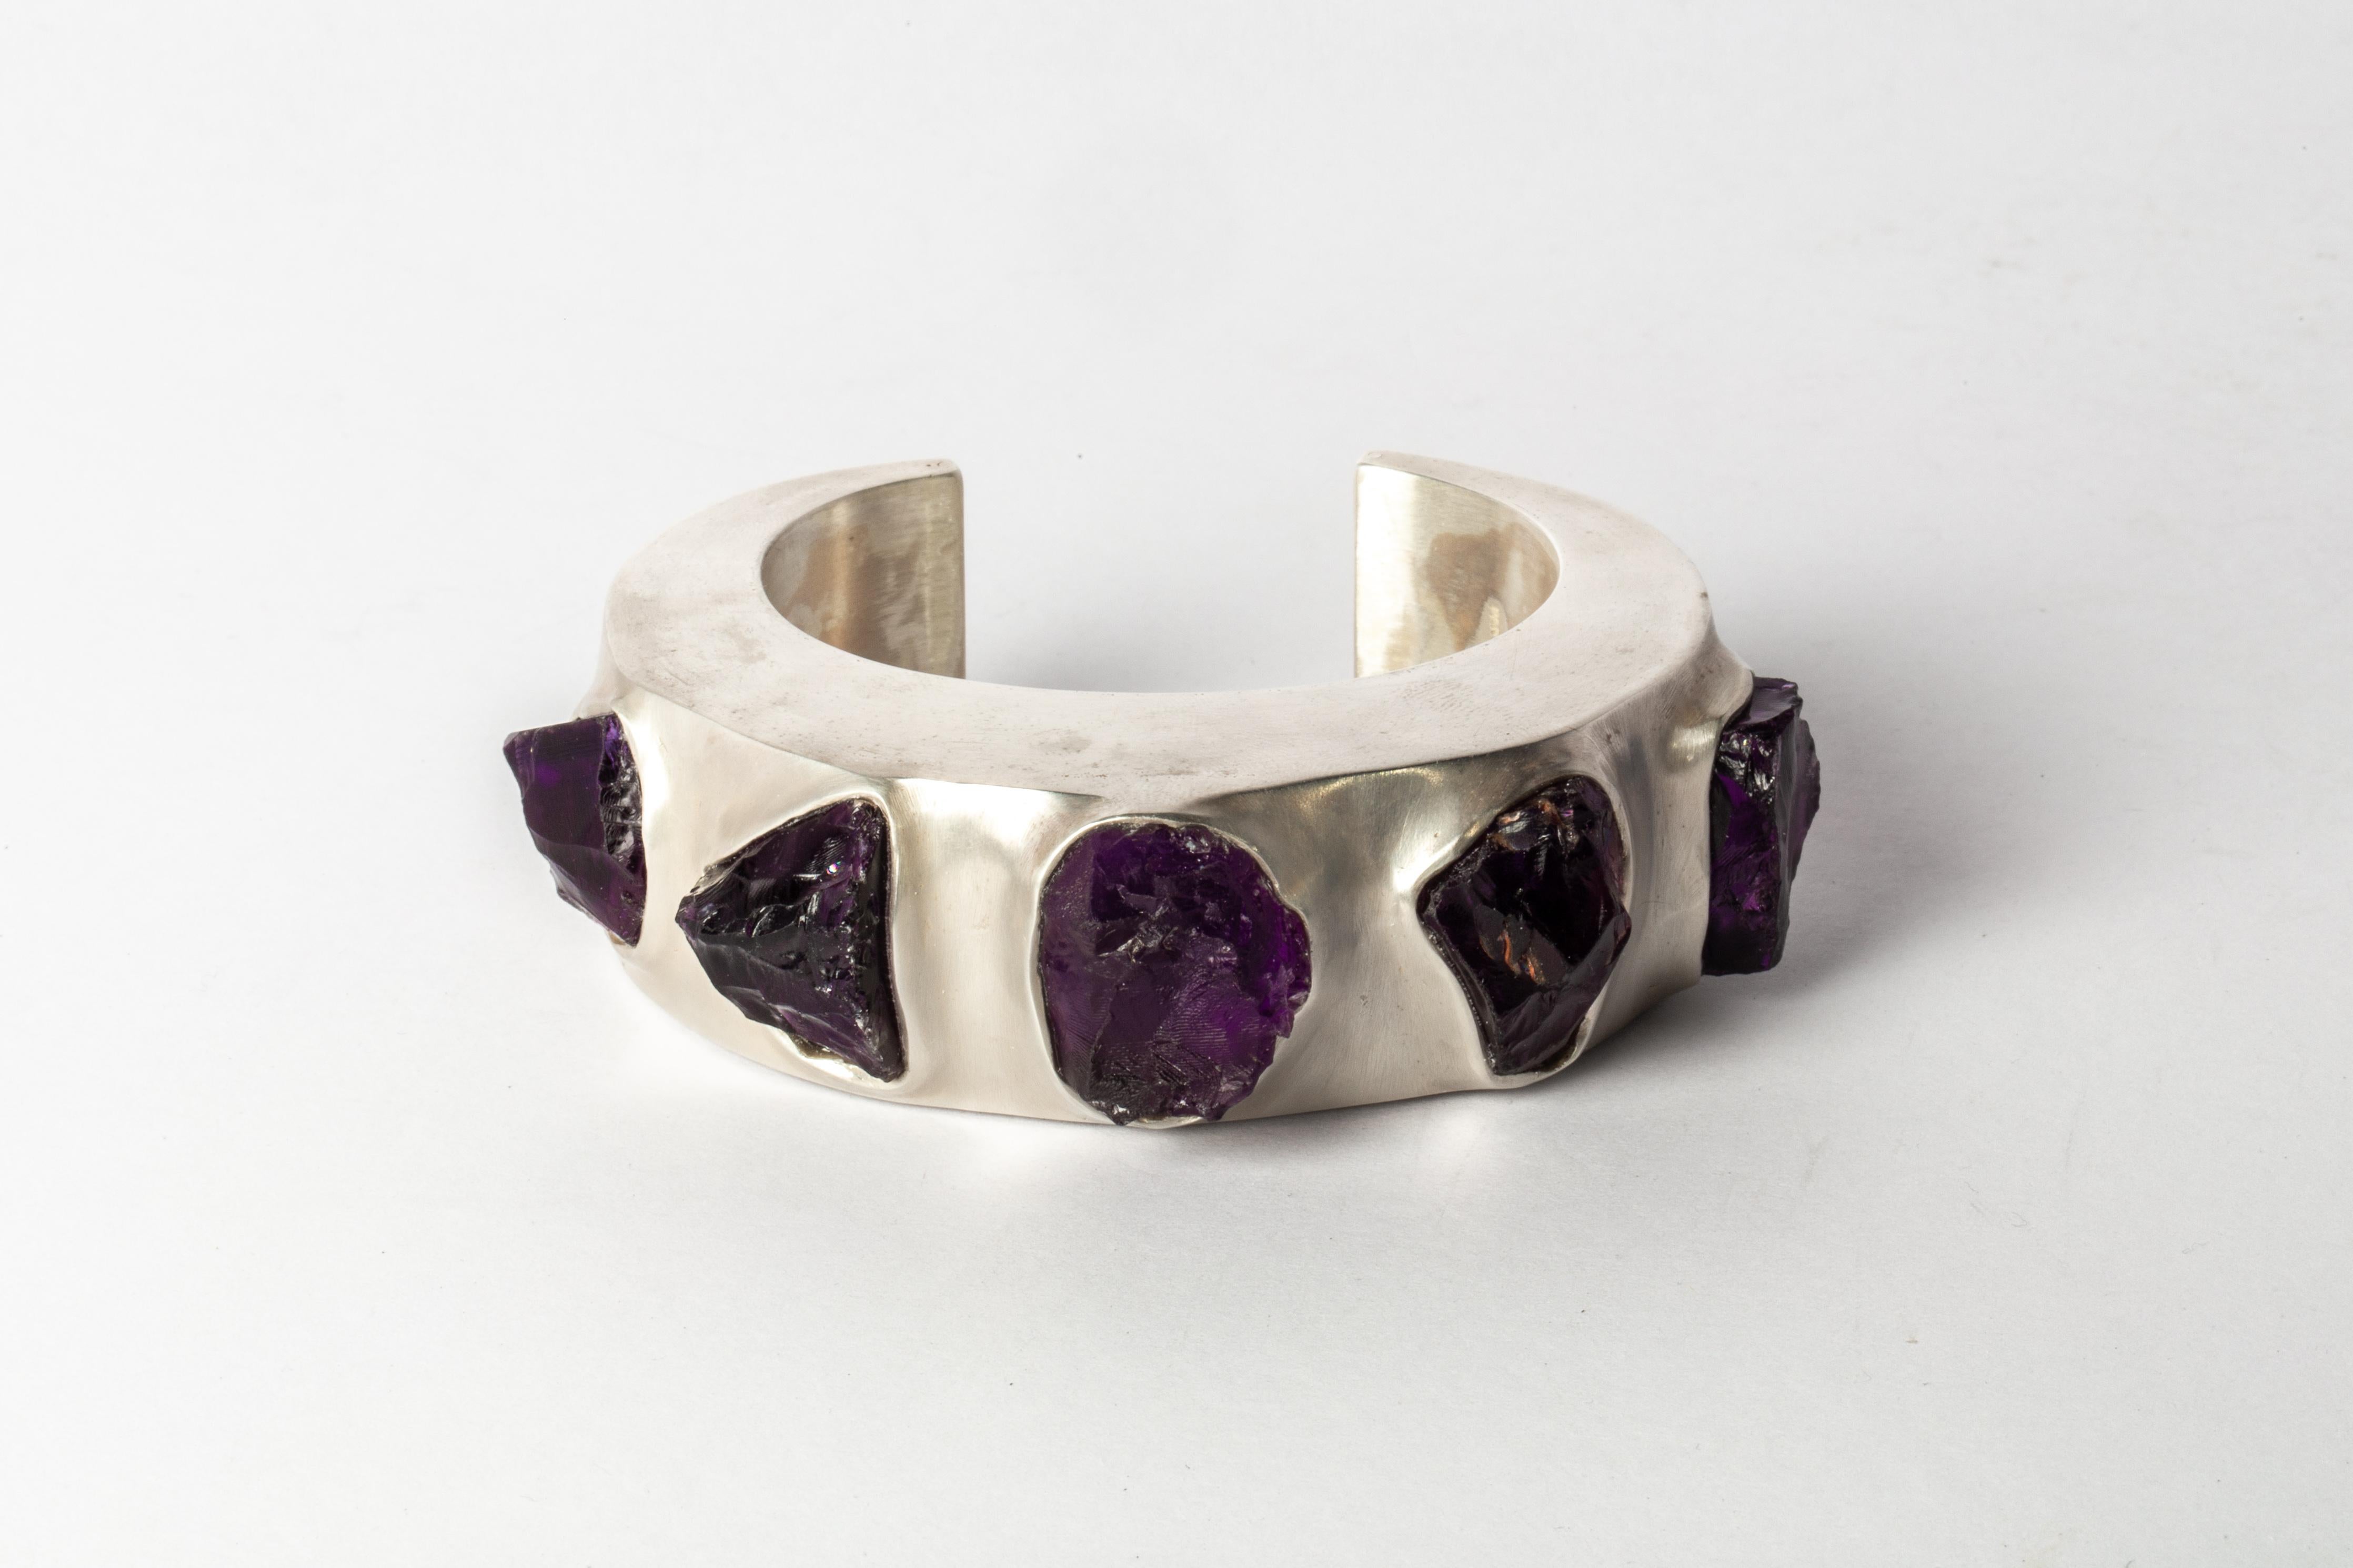 Crescent Bracelet (Terrestrial Surfaced, Amethyst, 30mm, AS+MA+AME) In New Condition For Sale In Hong Kong, Hong Kong Island